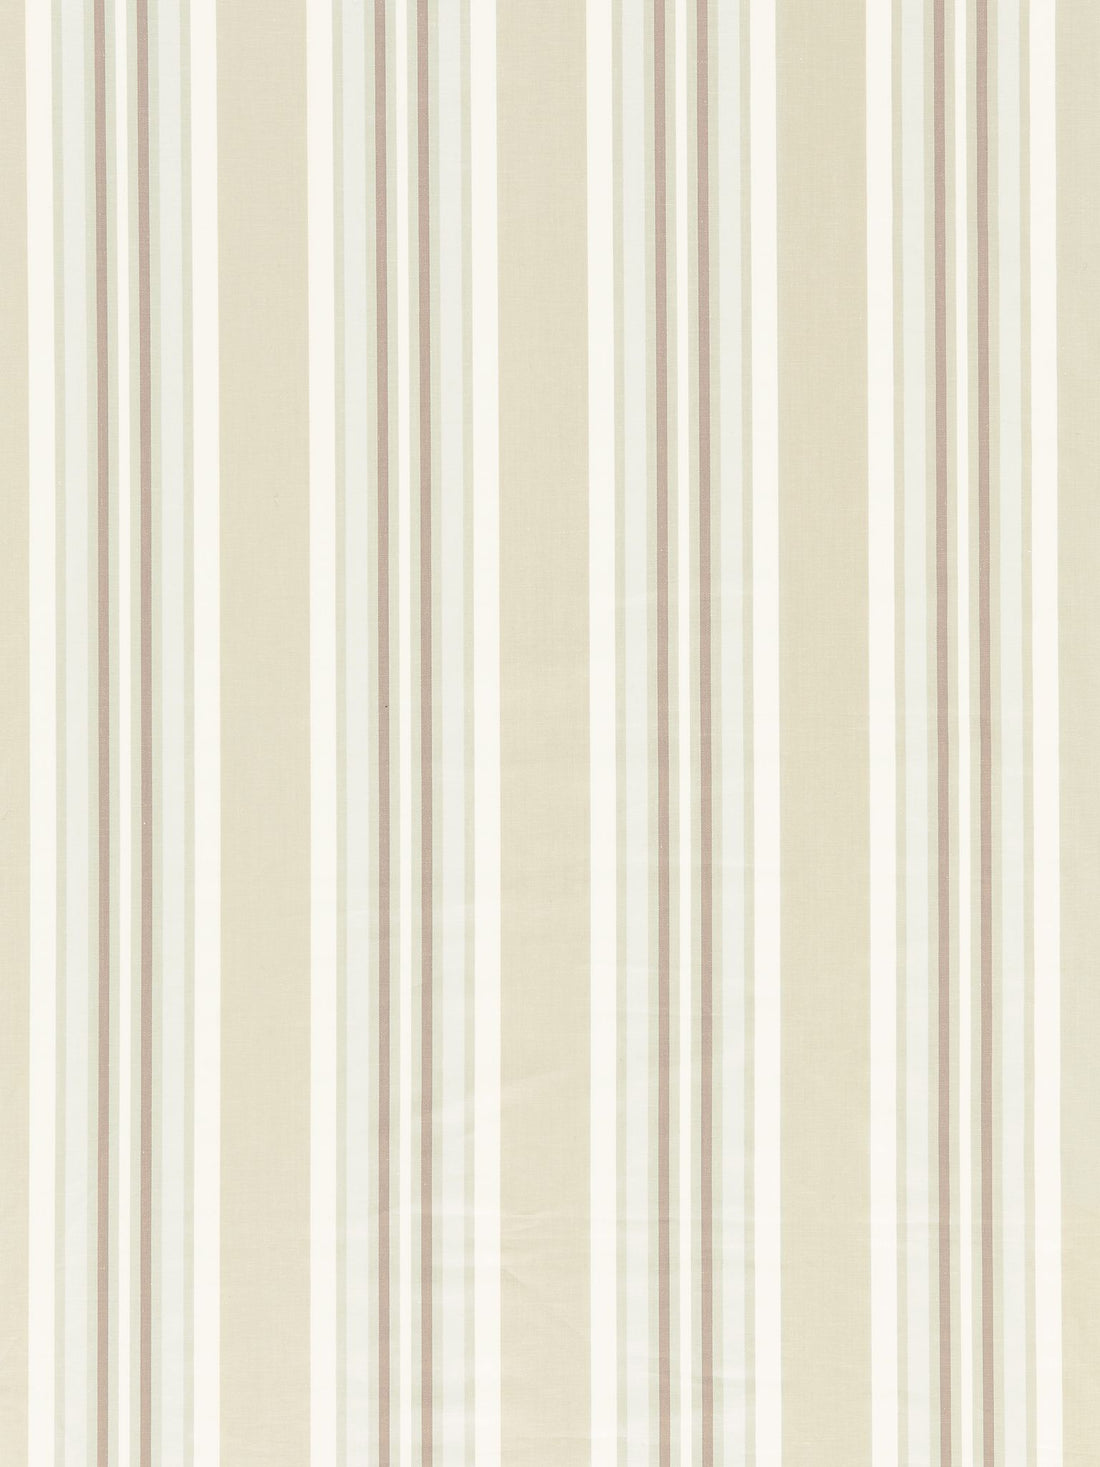 Strada Stripe fabric in taupe color - pattern number SC 000127220 - by Scalamandre in the Scalamandre Fabrics Book 1 collection